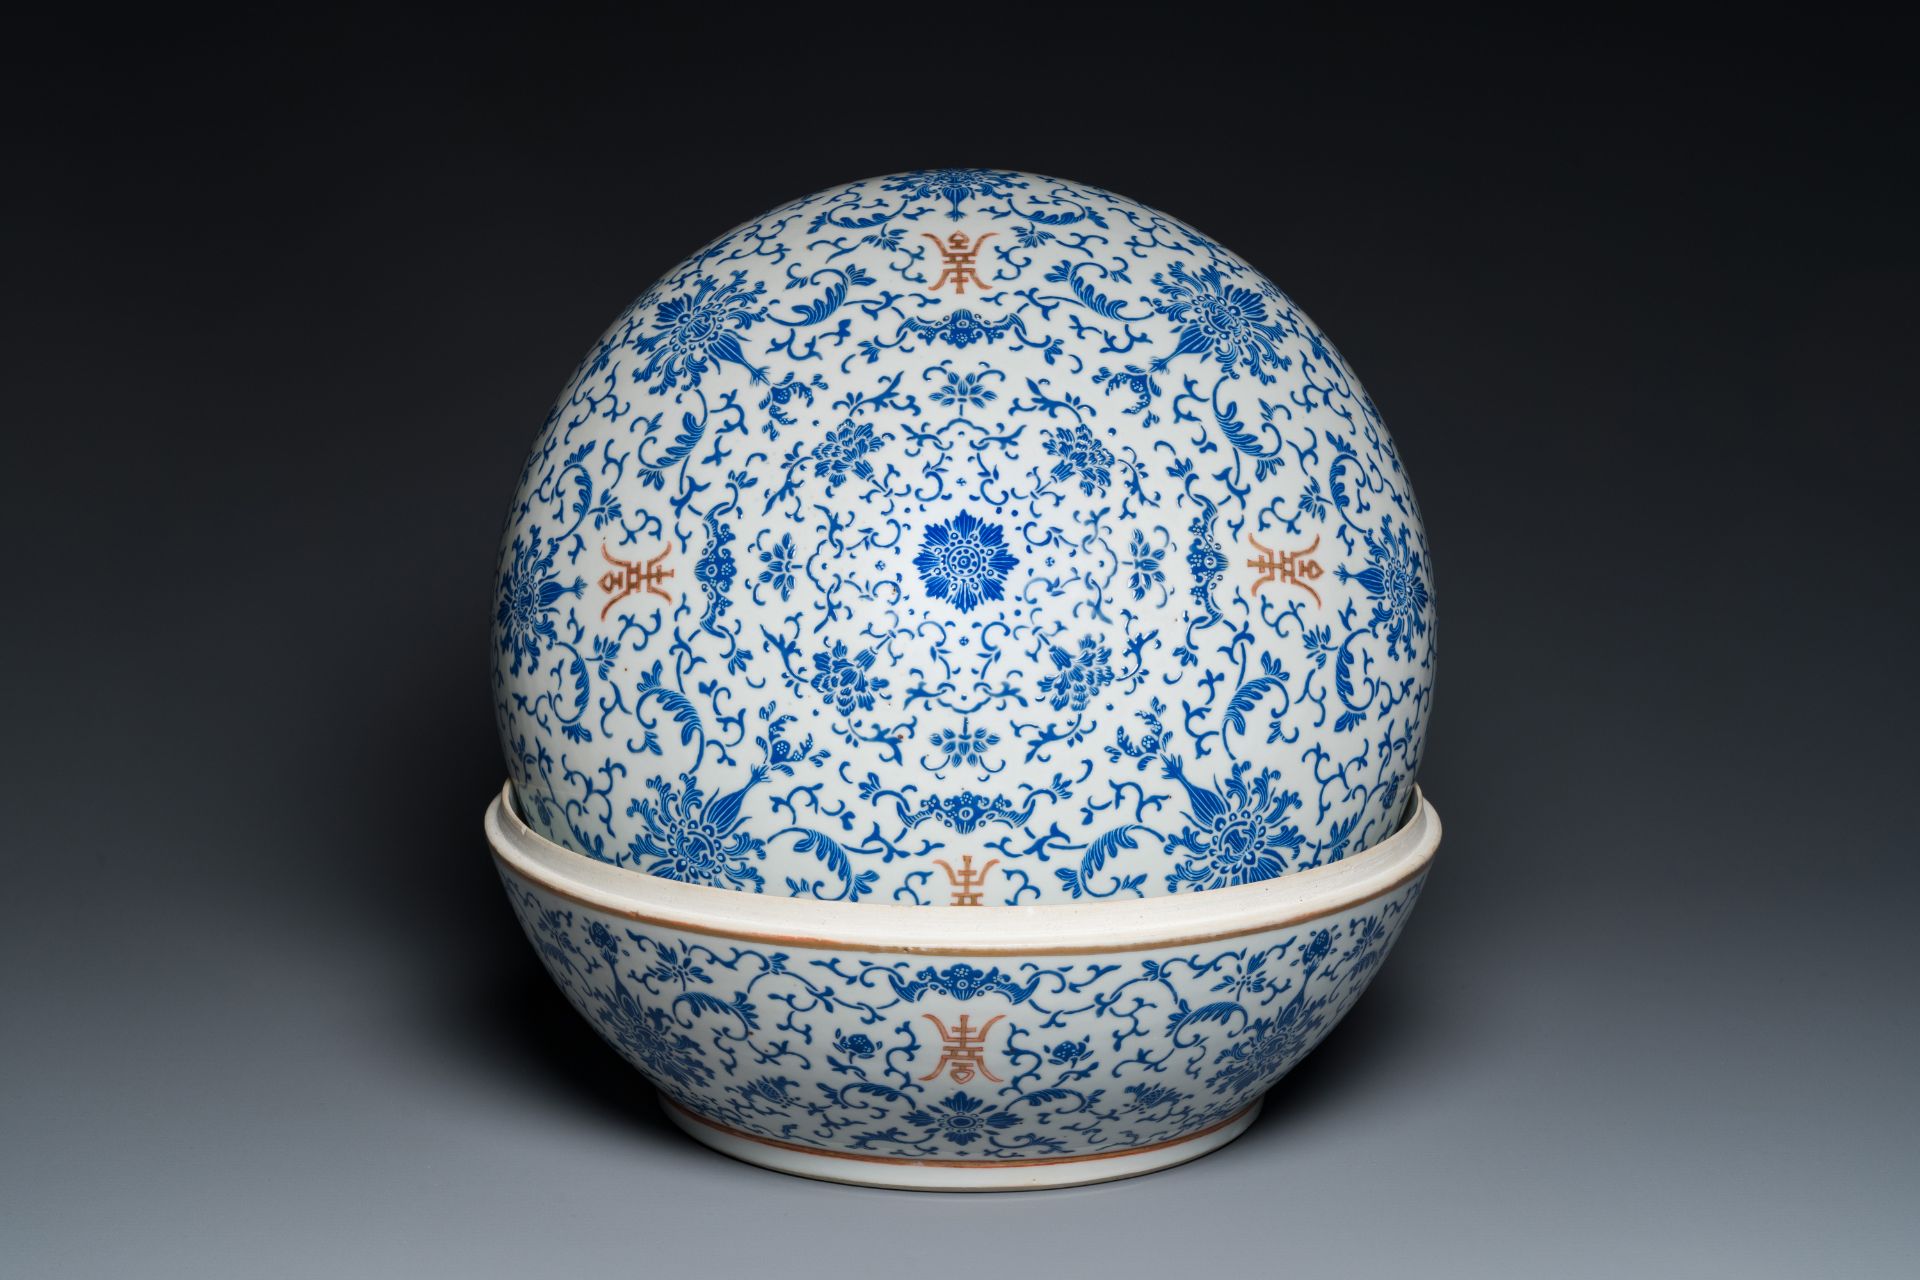 A large round Chinese box and cover with overglaze blue enamel lotus design, Guangxu mark and of the